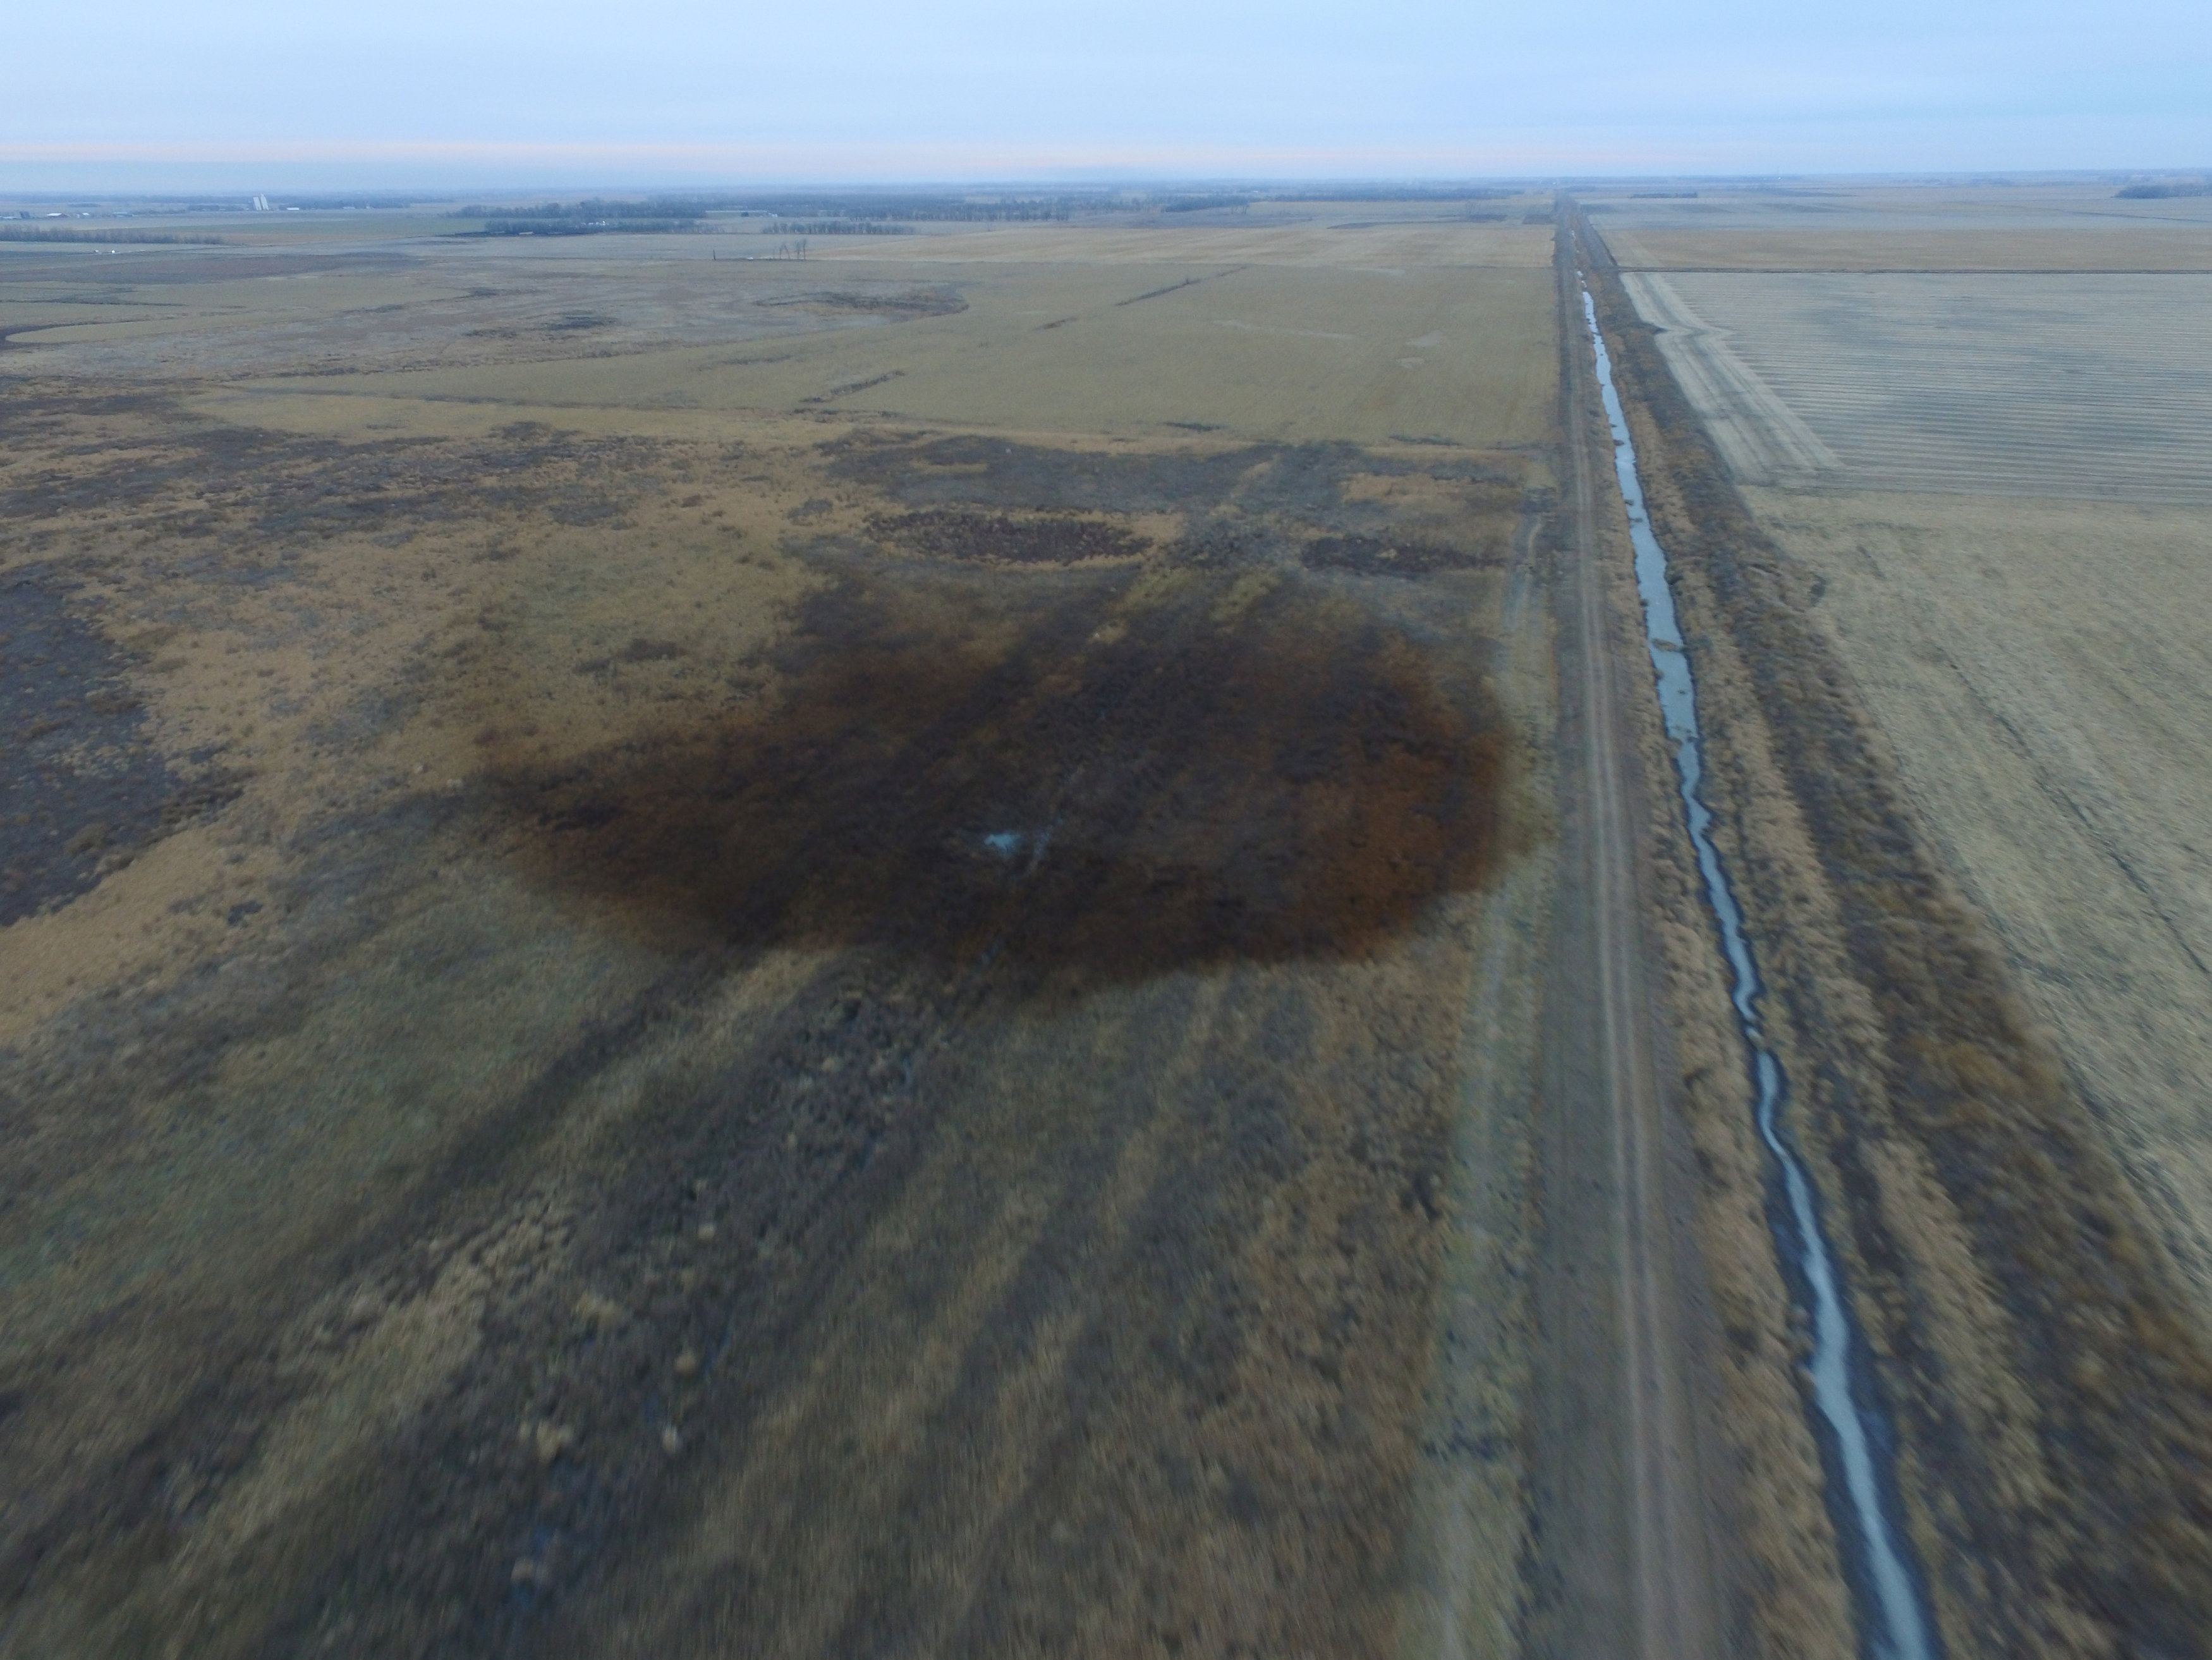 An aerial view shows the darkened ground of an oil spill which shut down the Keystone pipeline between Canada and the United States, located in an agricultural area near Amherst, South Dakota, U.S., in this photo provided November 18, 2017.